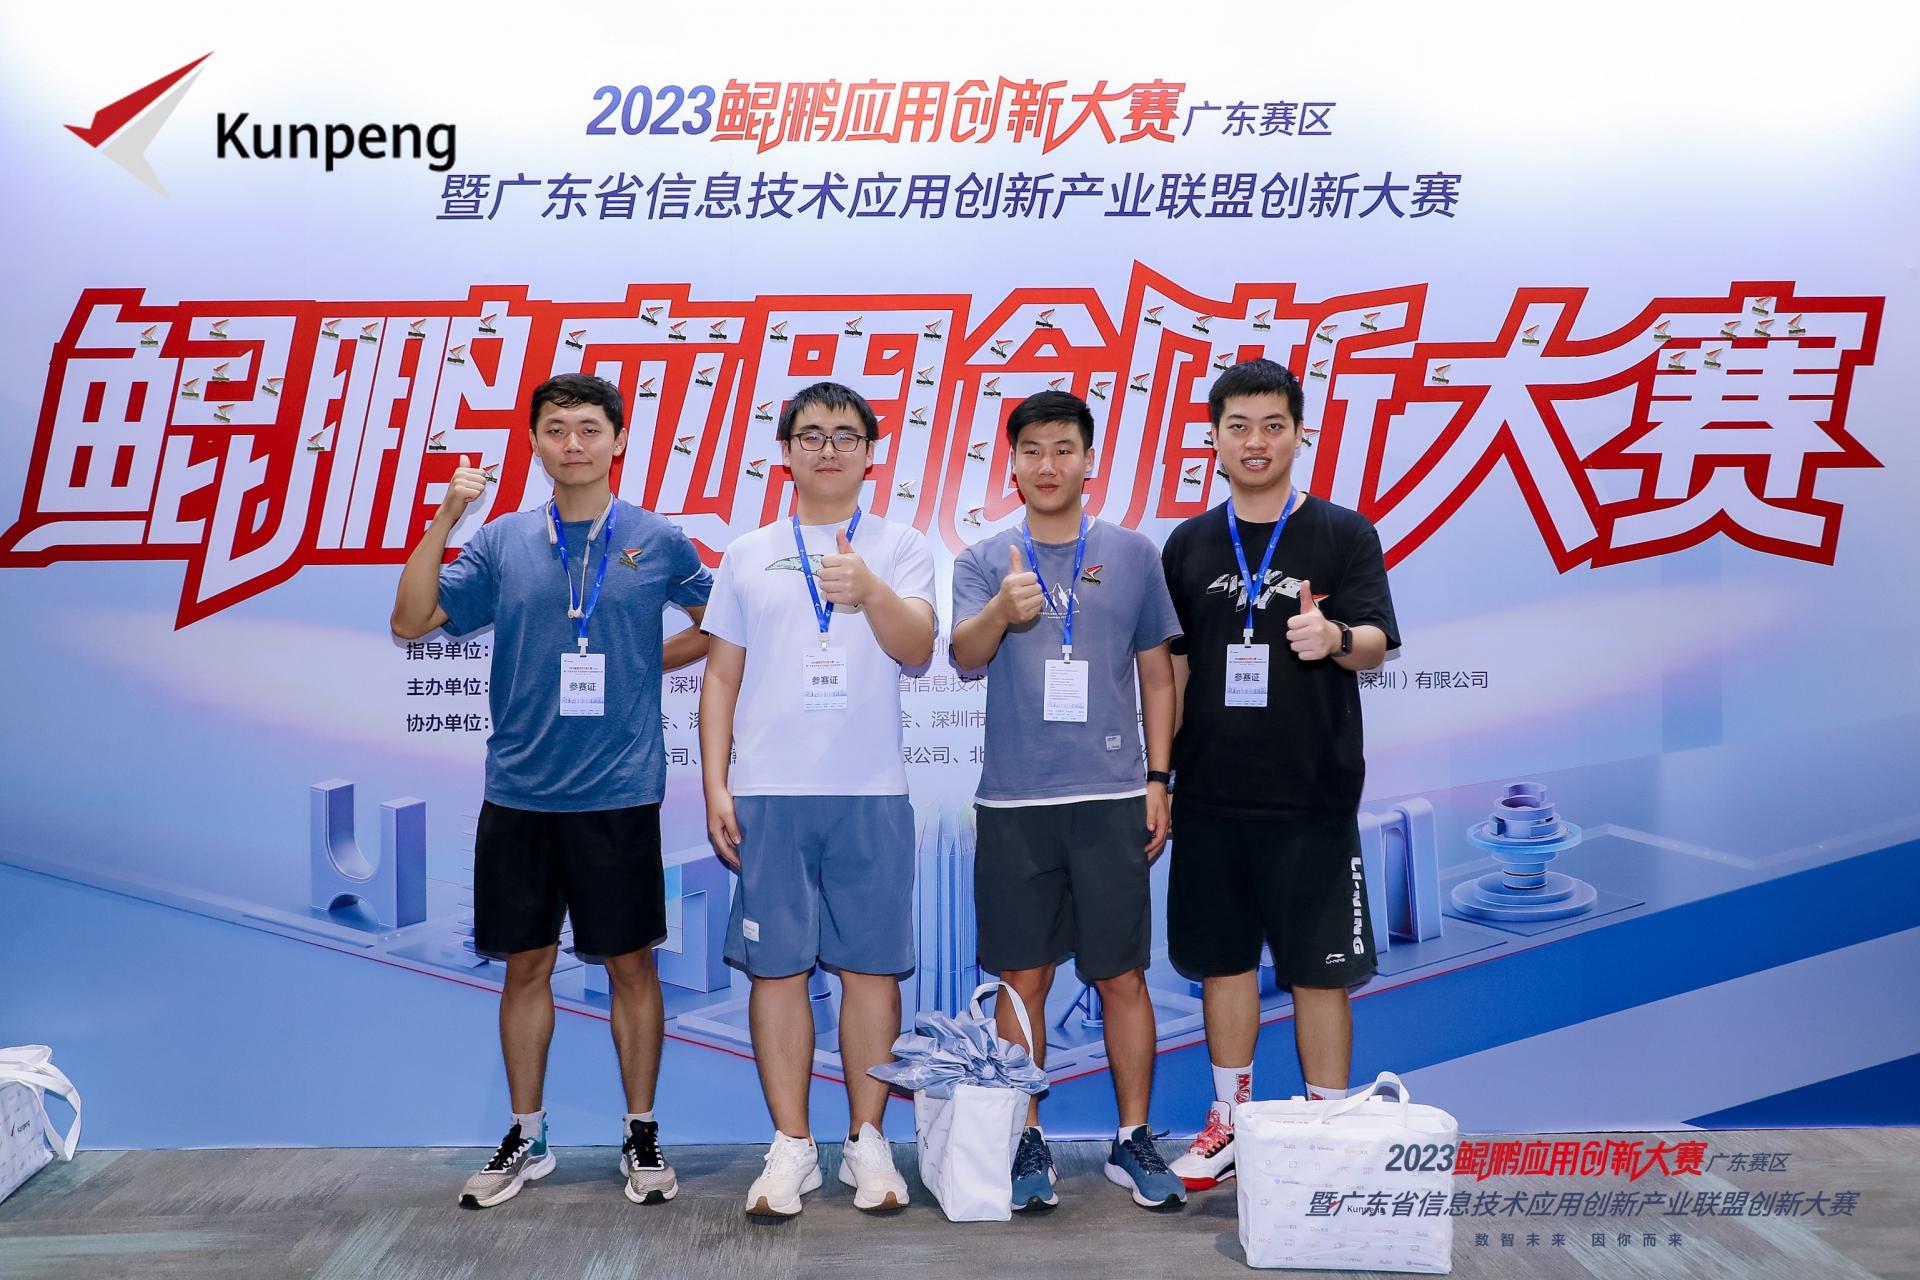 SUSTech’s Supercomputing Team wins first prize in Kunpeng Application Innovation Competition